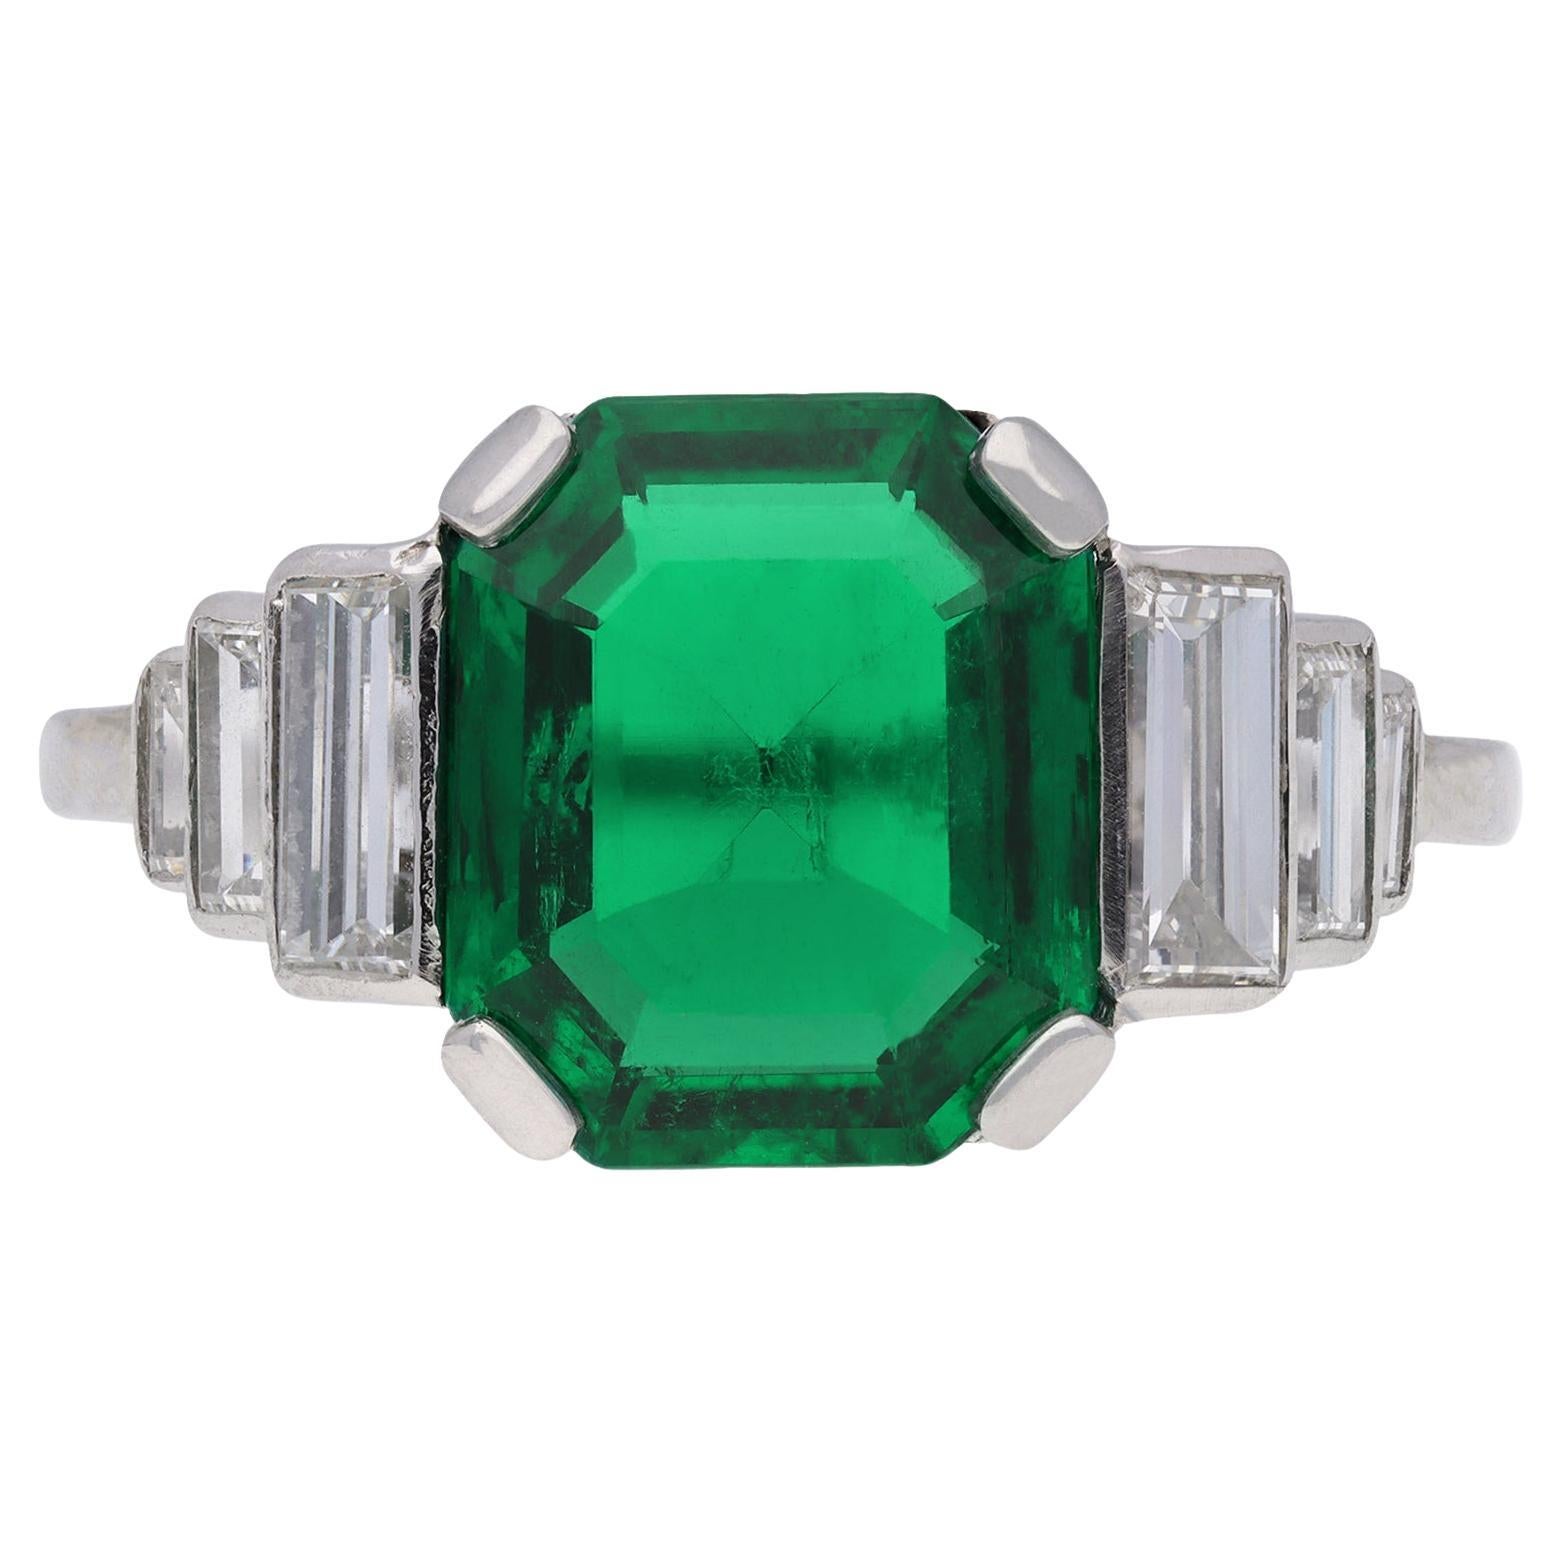 Art Deco Colombian emerald and diamond flanked solitaire ring, circa 1925.